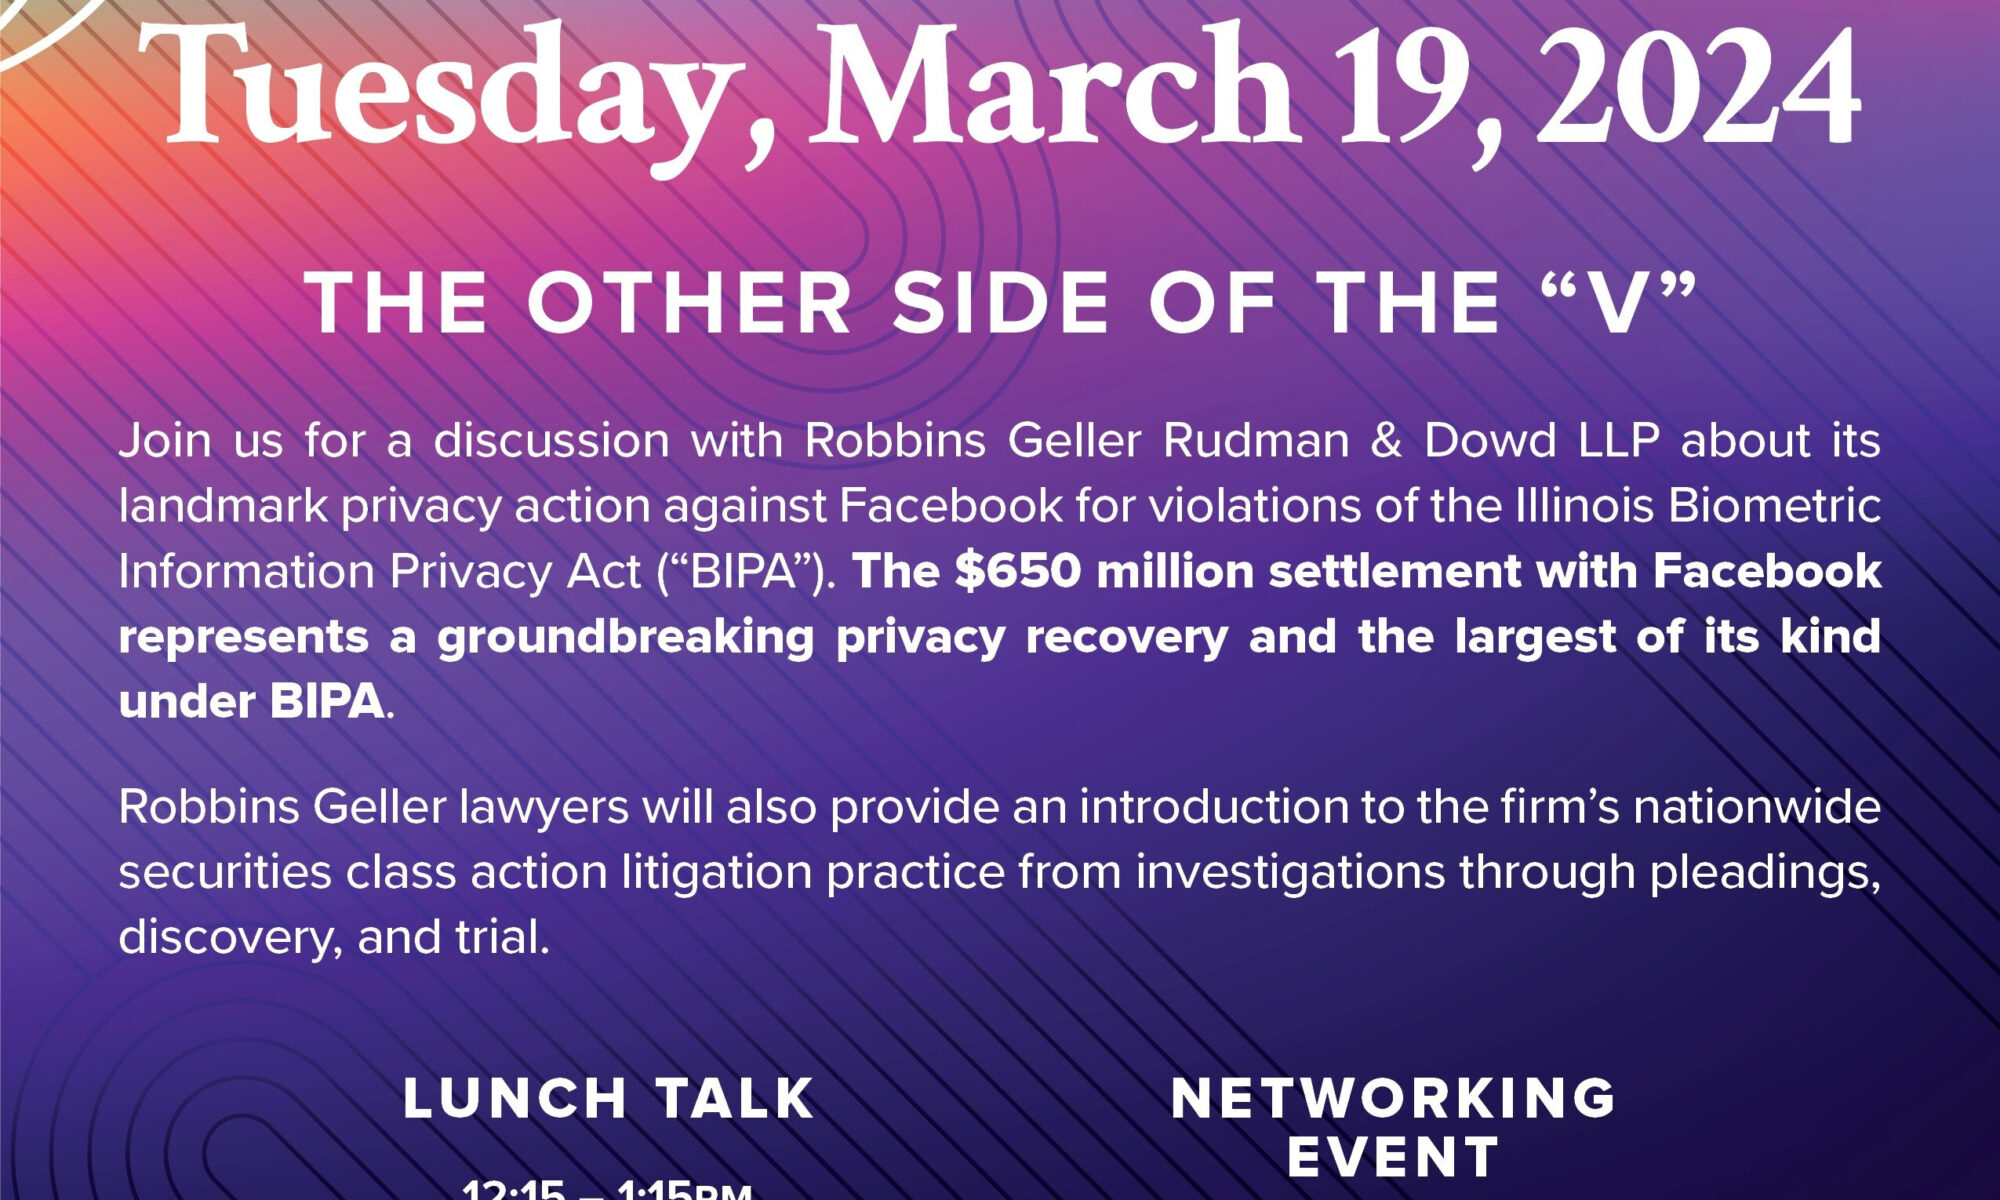 Tuesday, March 19, 12:15 PM – 1:15 PM, WCC 2009 Join us for a discussion with Robbins Geller Rudman & Dowd LLP about its landmark privacy action against Facebook for violations of the Illinois Biometric Information Privacy Act (“BIPA”). The $650 million settlement represents a groundbreaking privacy recovery and the largest of its kind under BIPA. Robbins Geller lawyers will also provide an introduction to the firm’s nationwide securities class action litigation practice from investigations through pleadings, discovery, and trial. Lunch will be provided from Tatte! RSVP here!